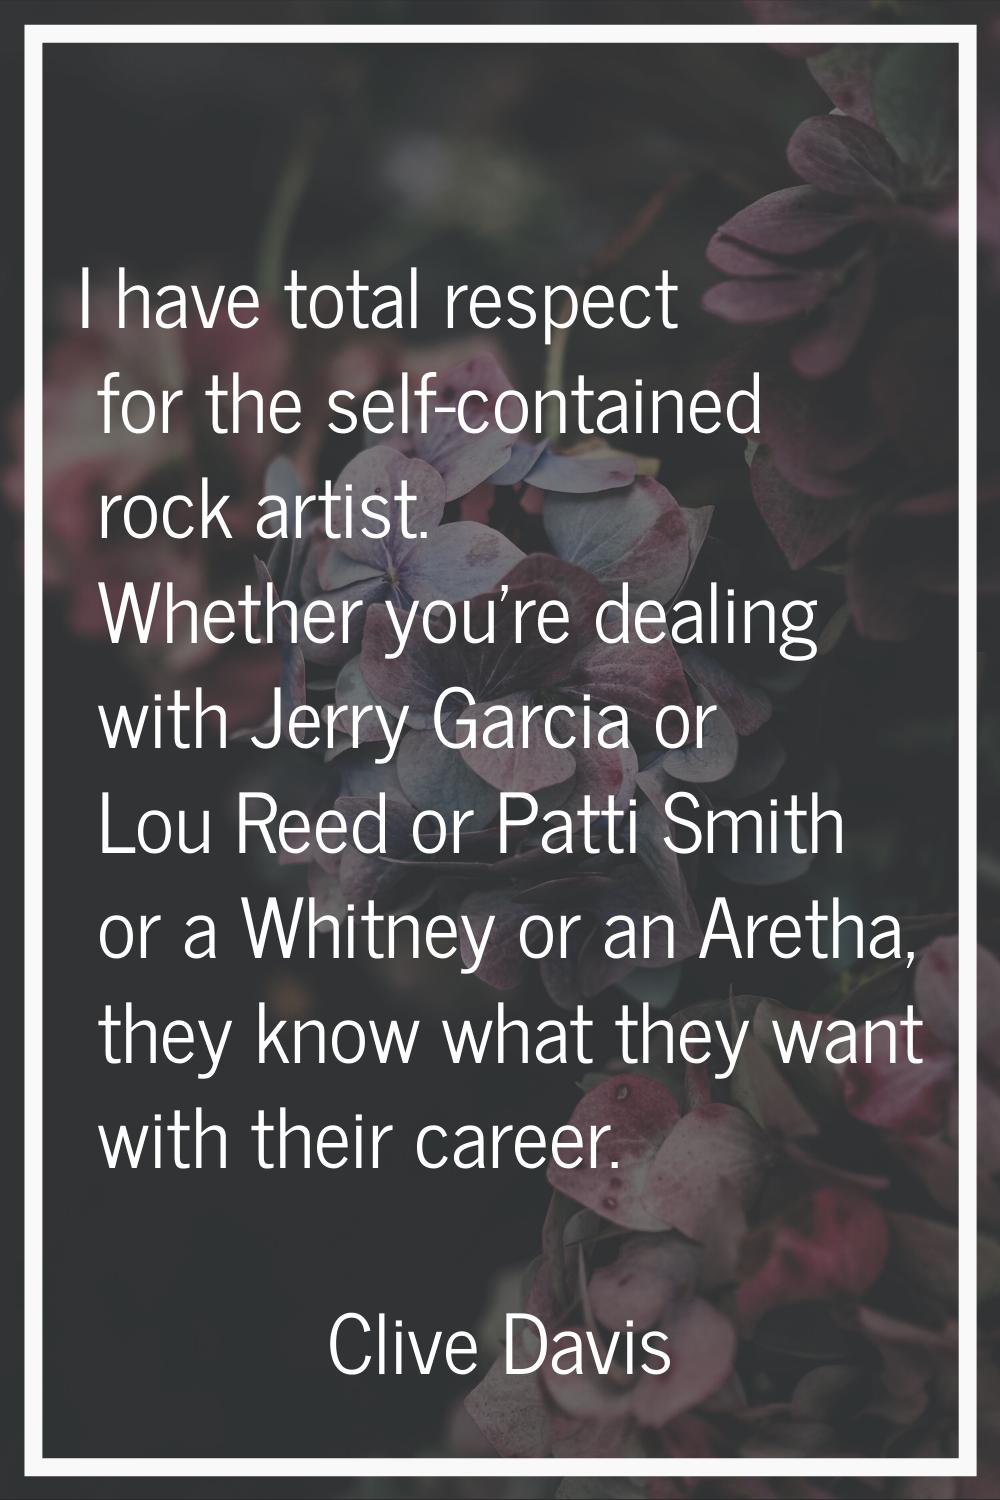 I have total respect for the self-contained rock artist. Whether you're dealing with Jerry Garcia o